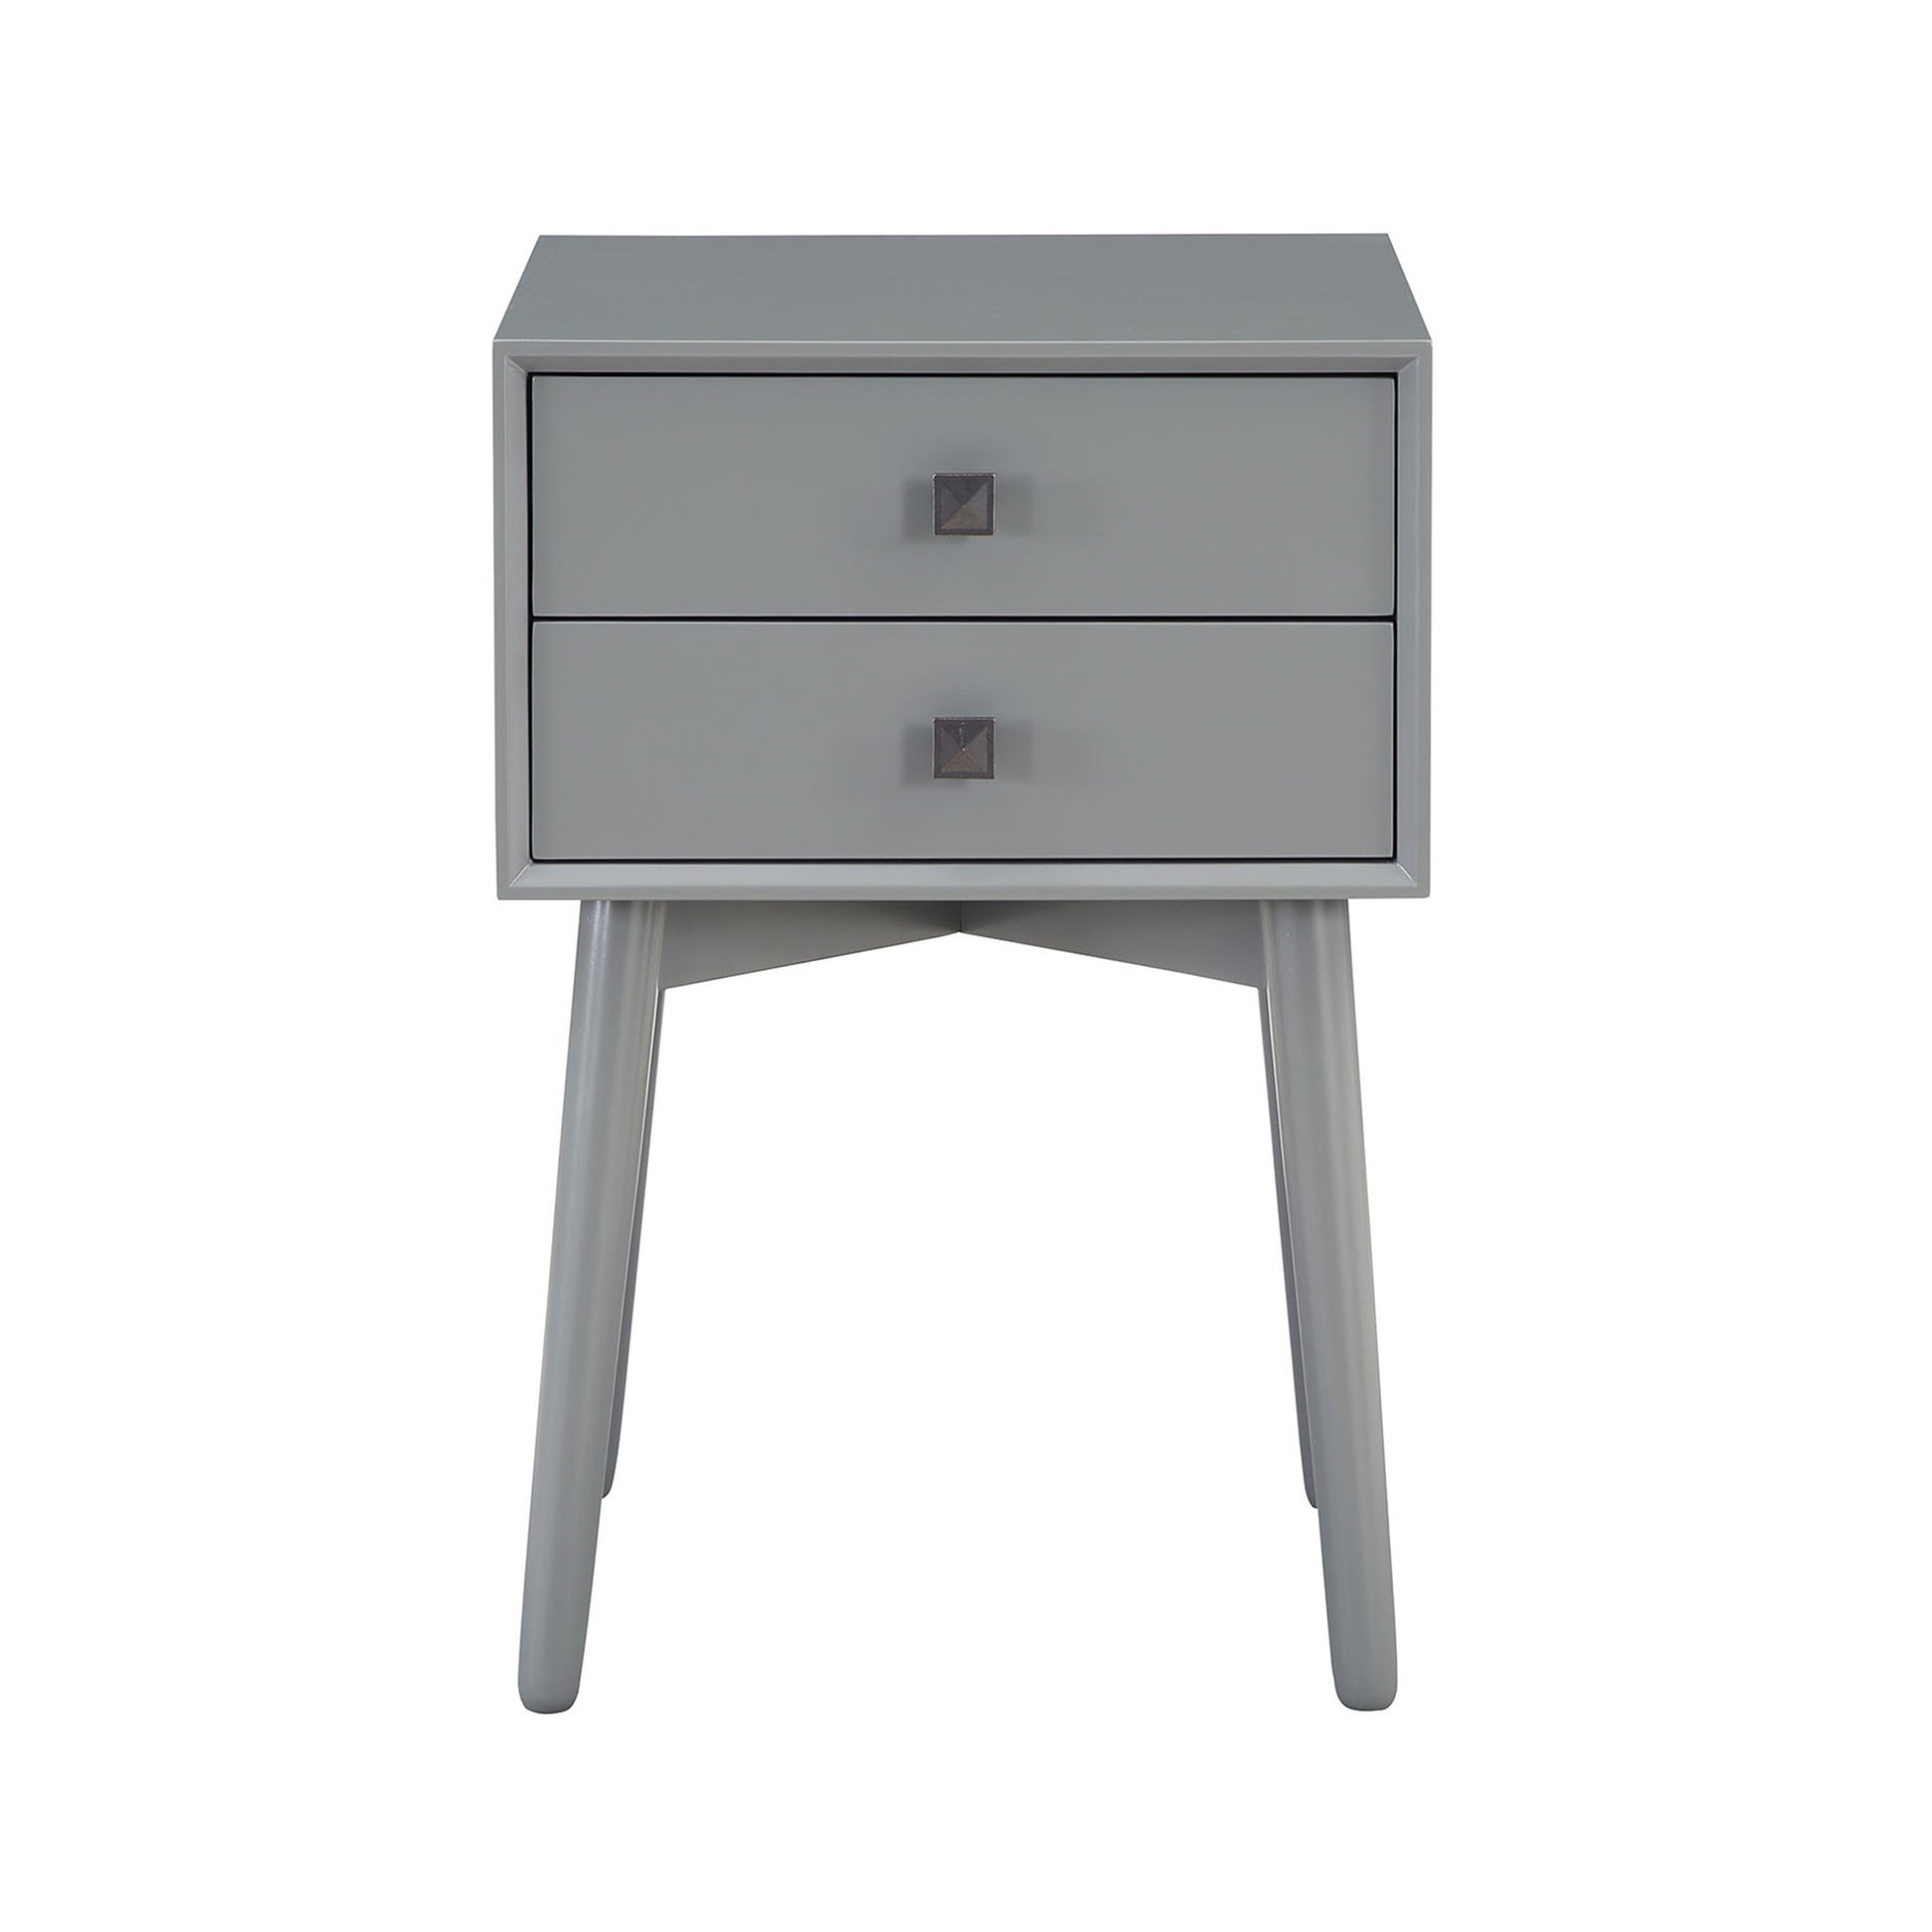 Front-facing modern gray two-drawer compact nightstand with splayed legs on a white background